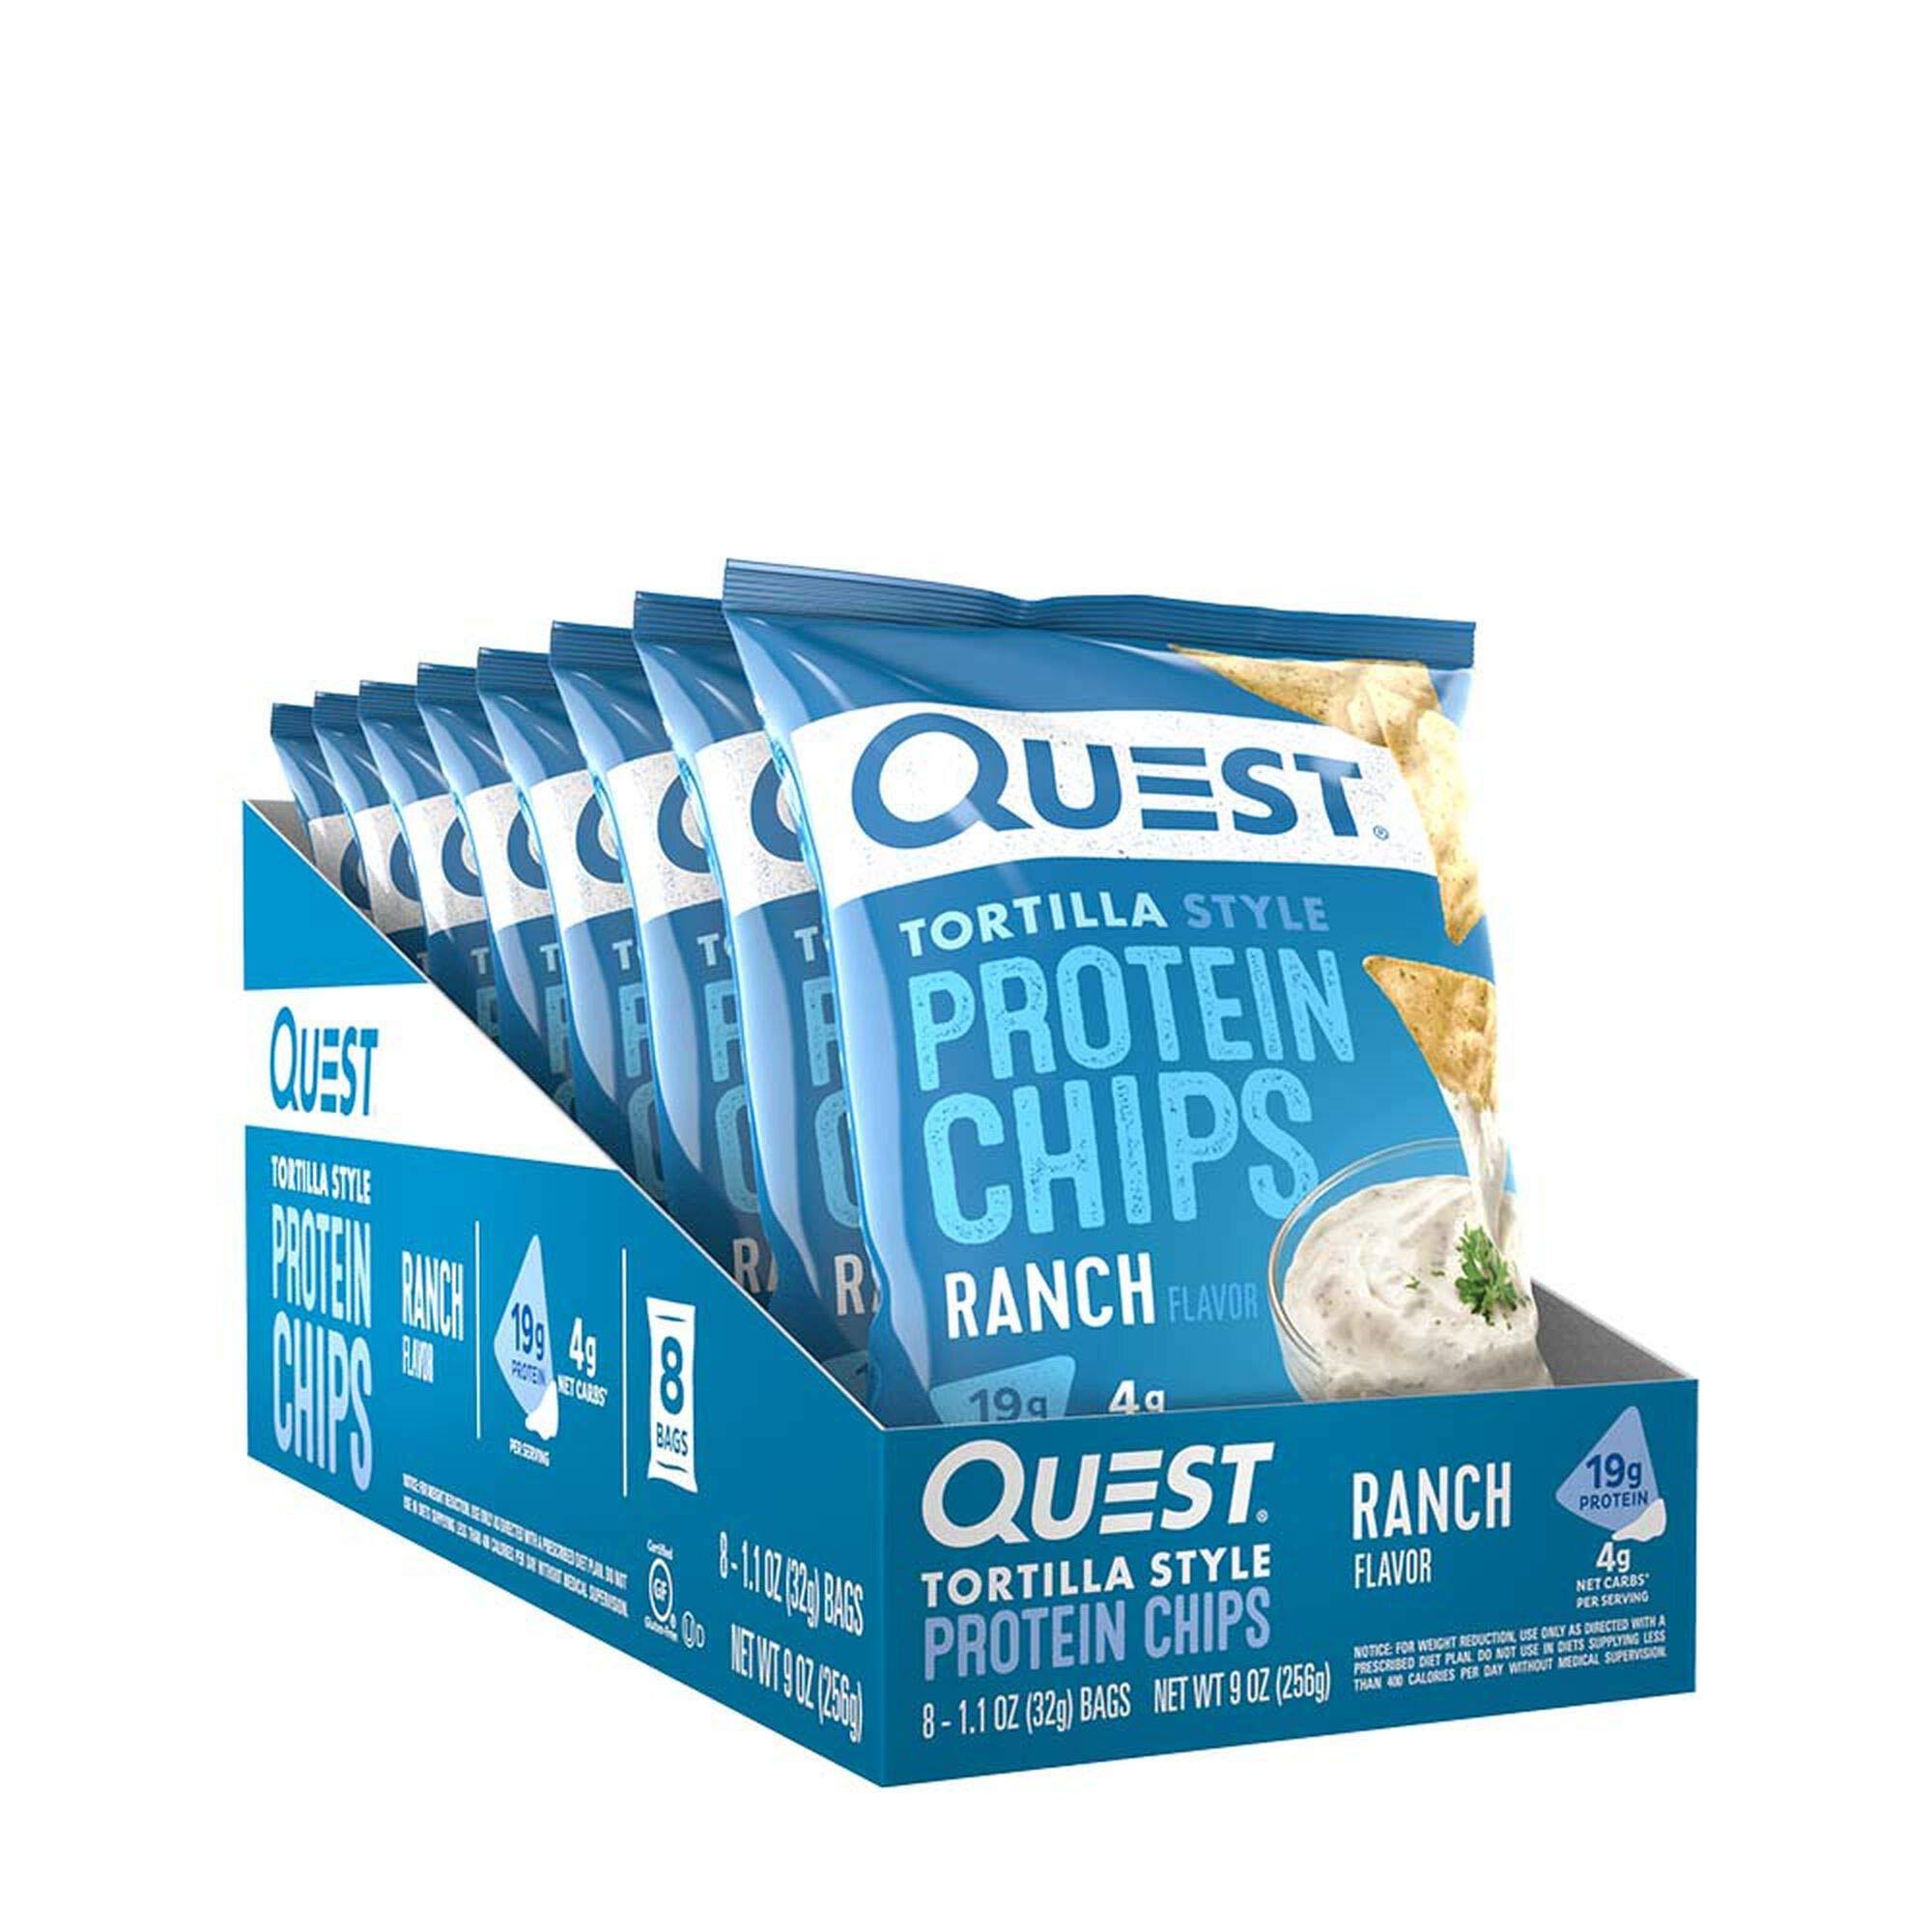 Quest Protein Chips, Ranch Flavor, Tortilla Style - 8 pack, 1.1 oz bags